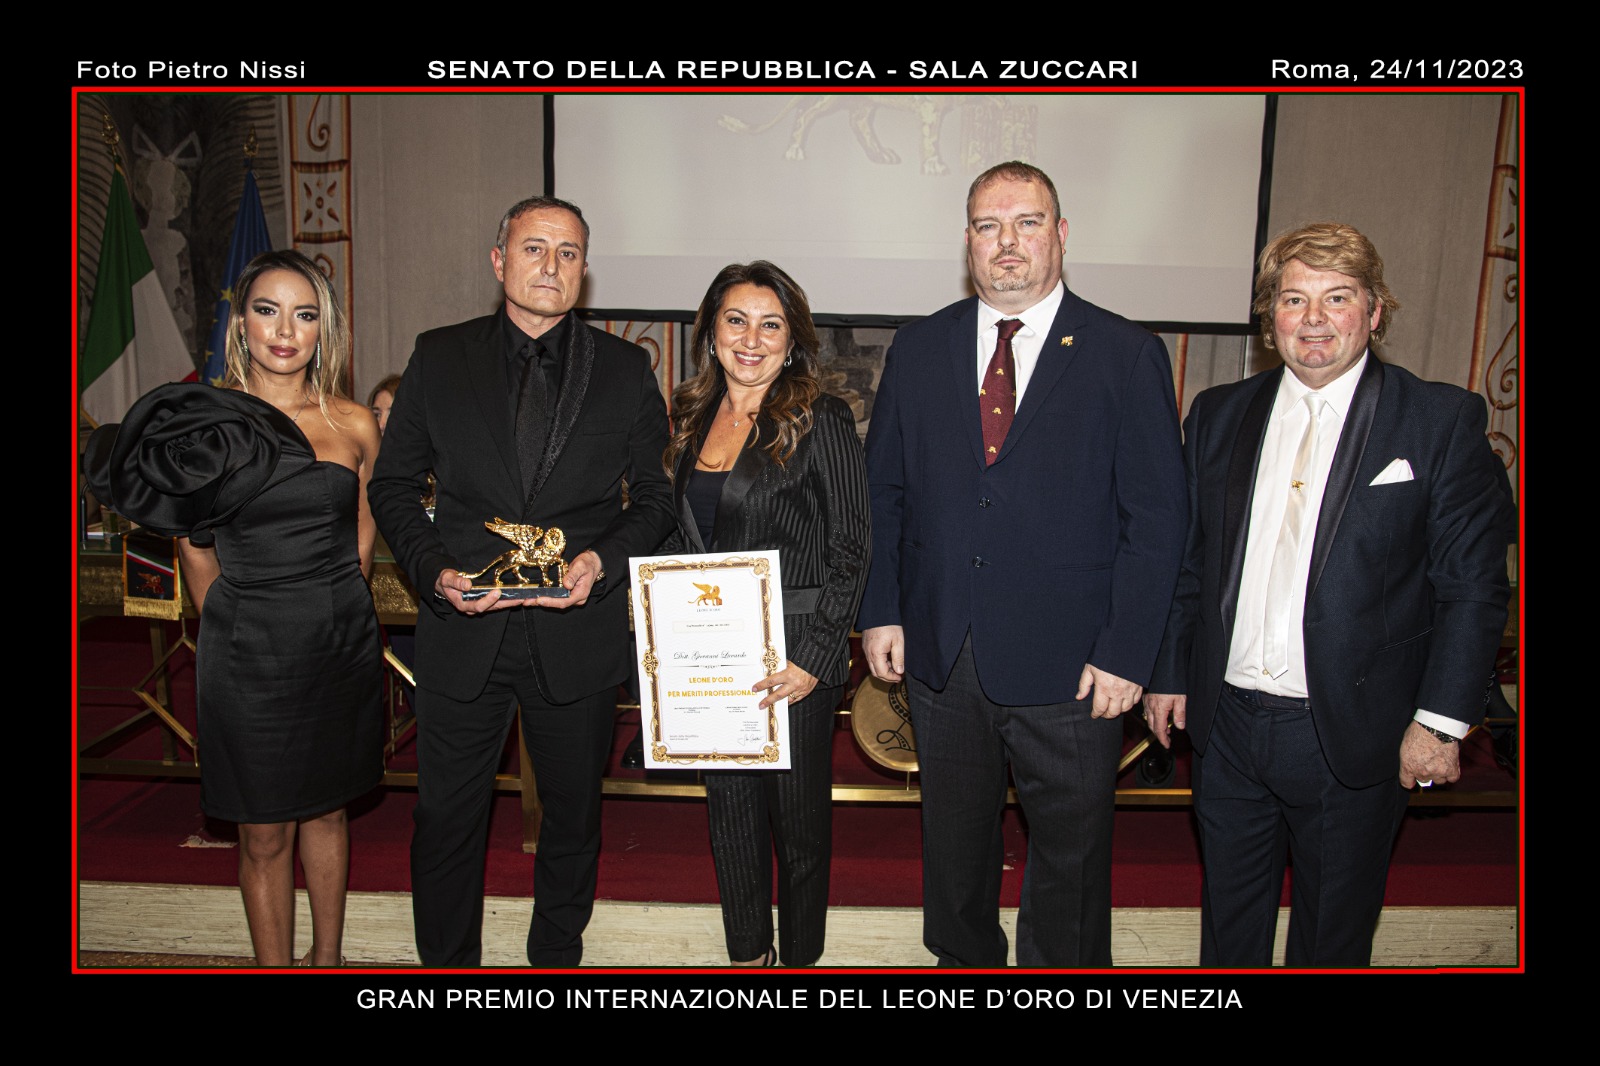 Giovanni Liccardo, founder and CEO of Lever Touch, awarded the Leone d'Oro in Venice for his professional achievements